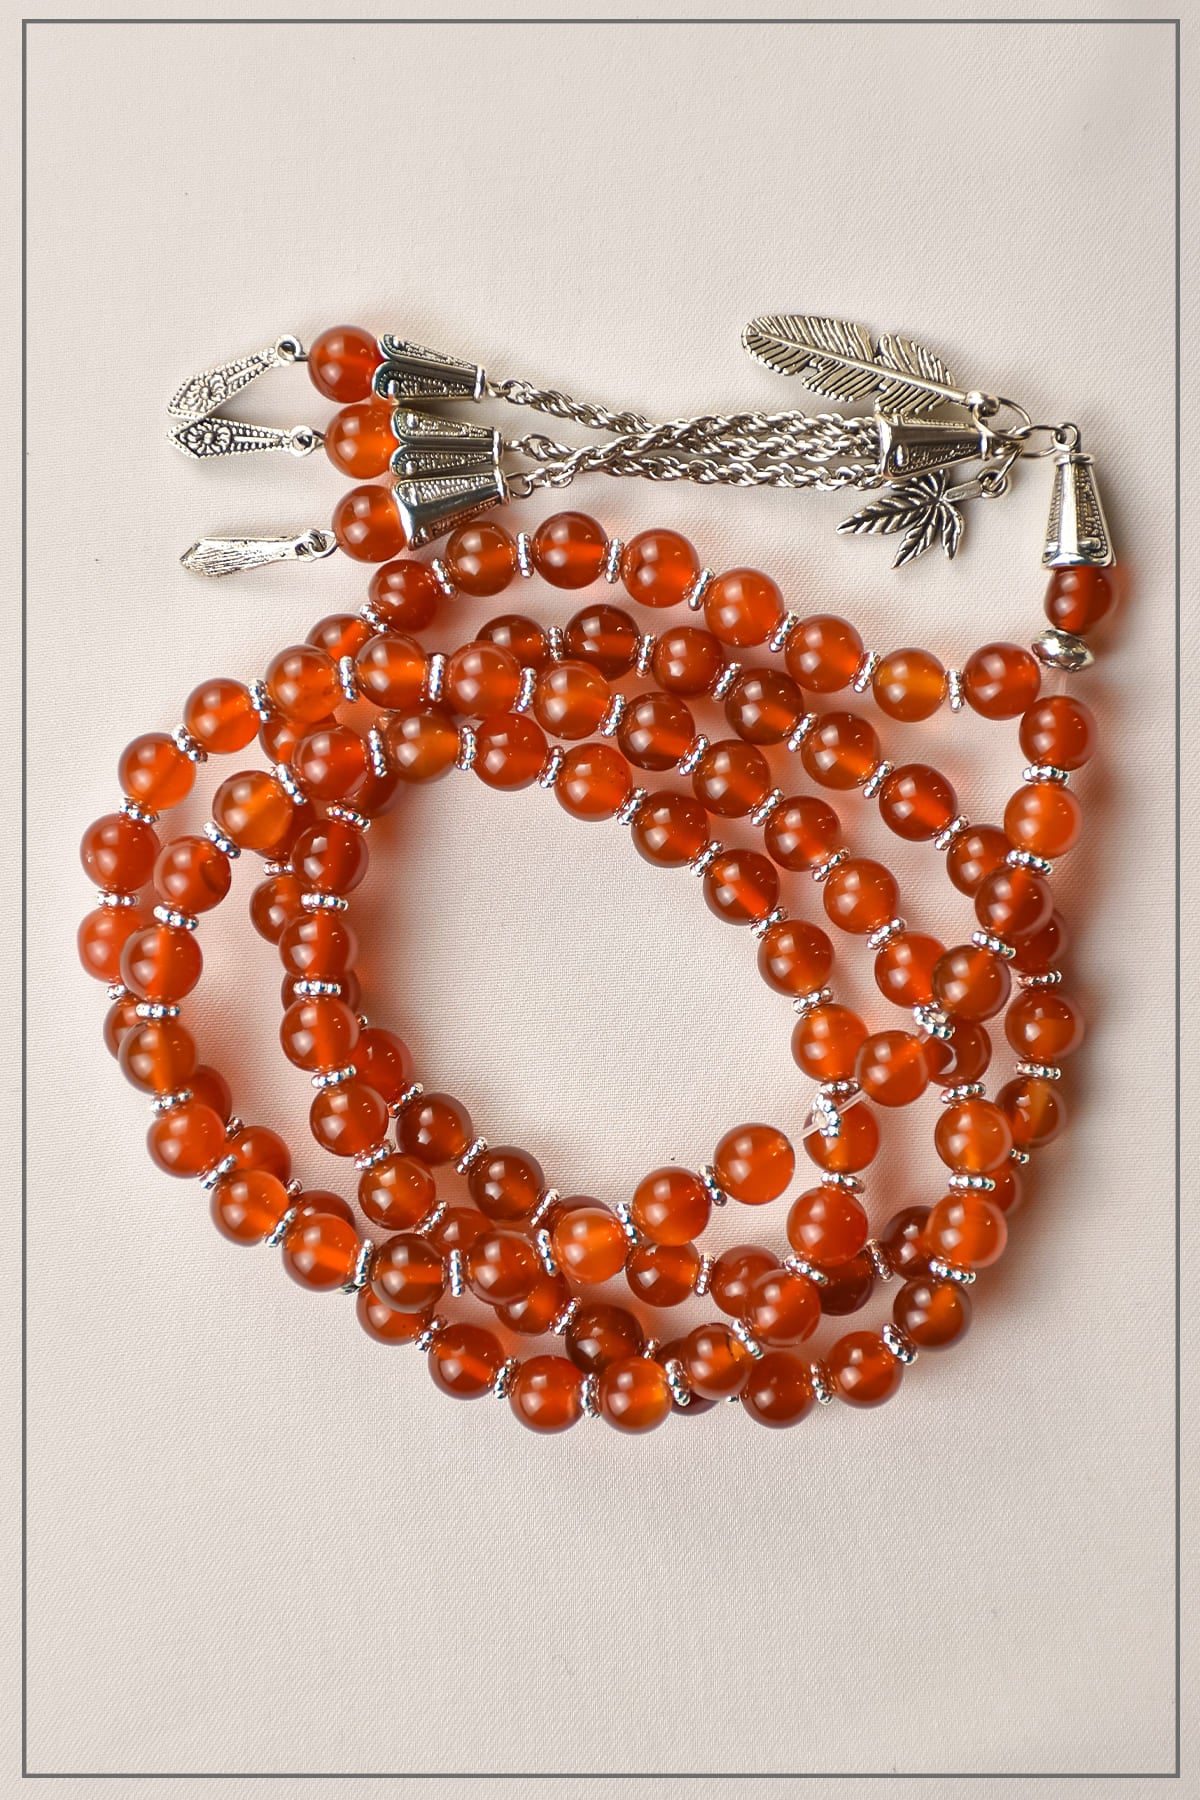 tasbih in rust color by malbus